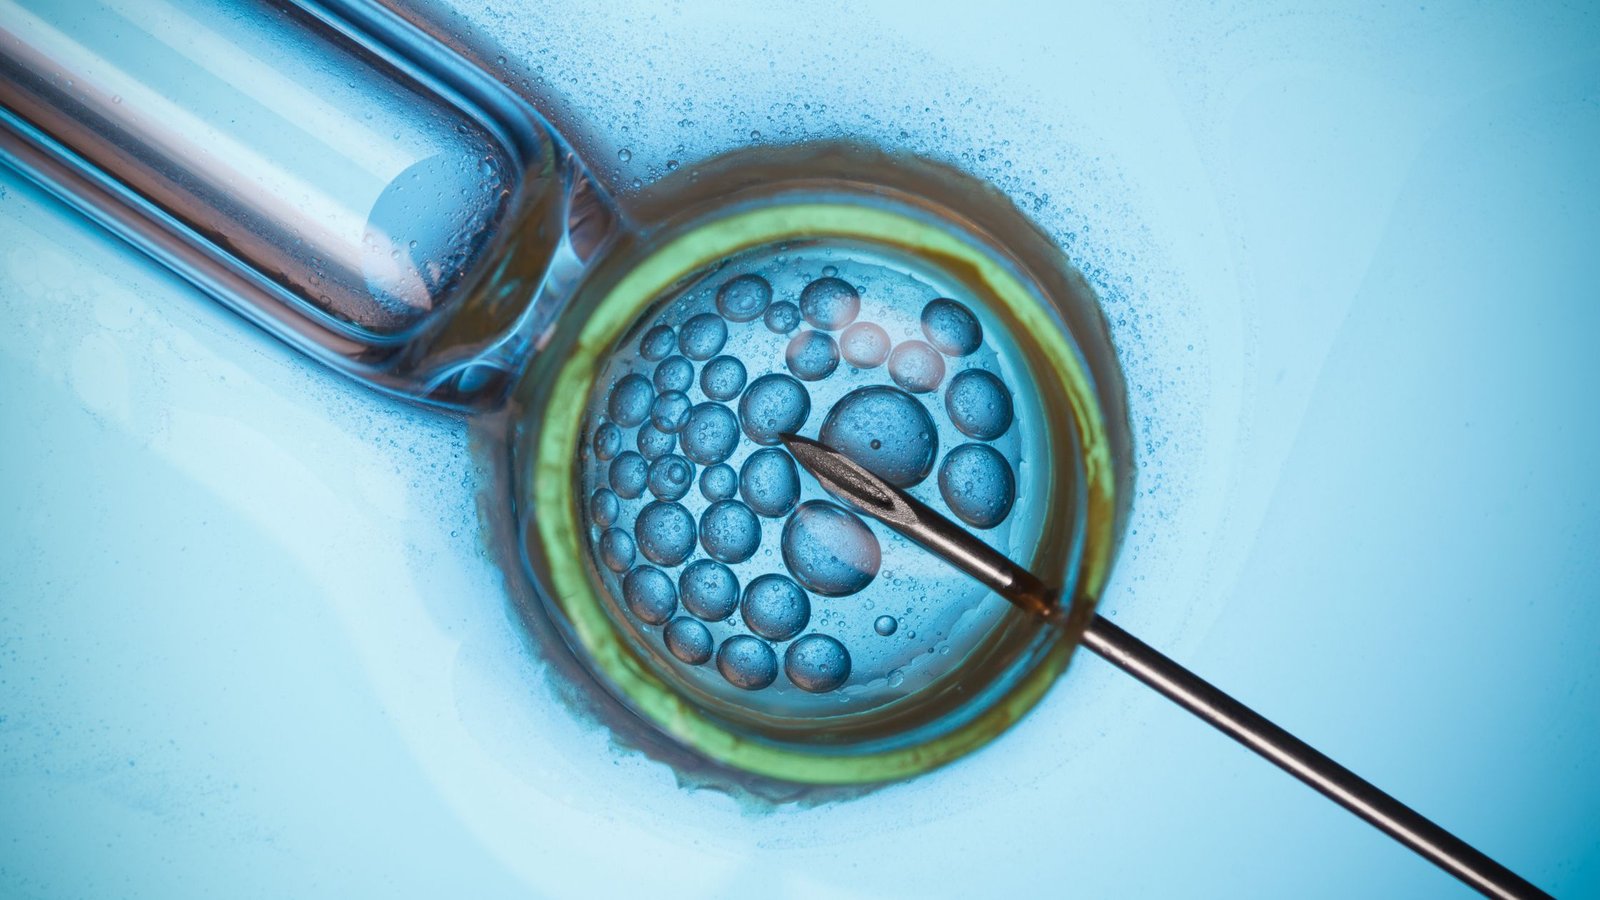 What’s Next in Test-Tube Baby Treatment? Exploring the Latest Advancements